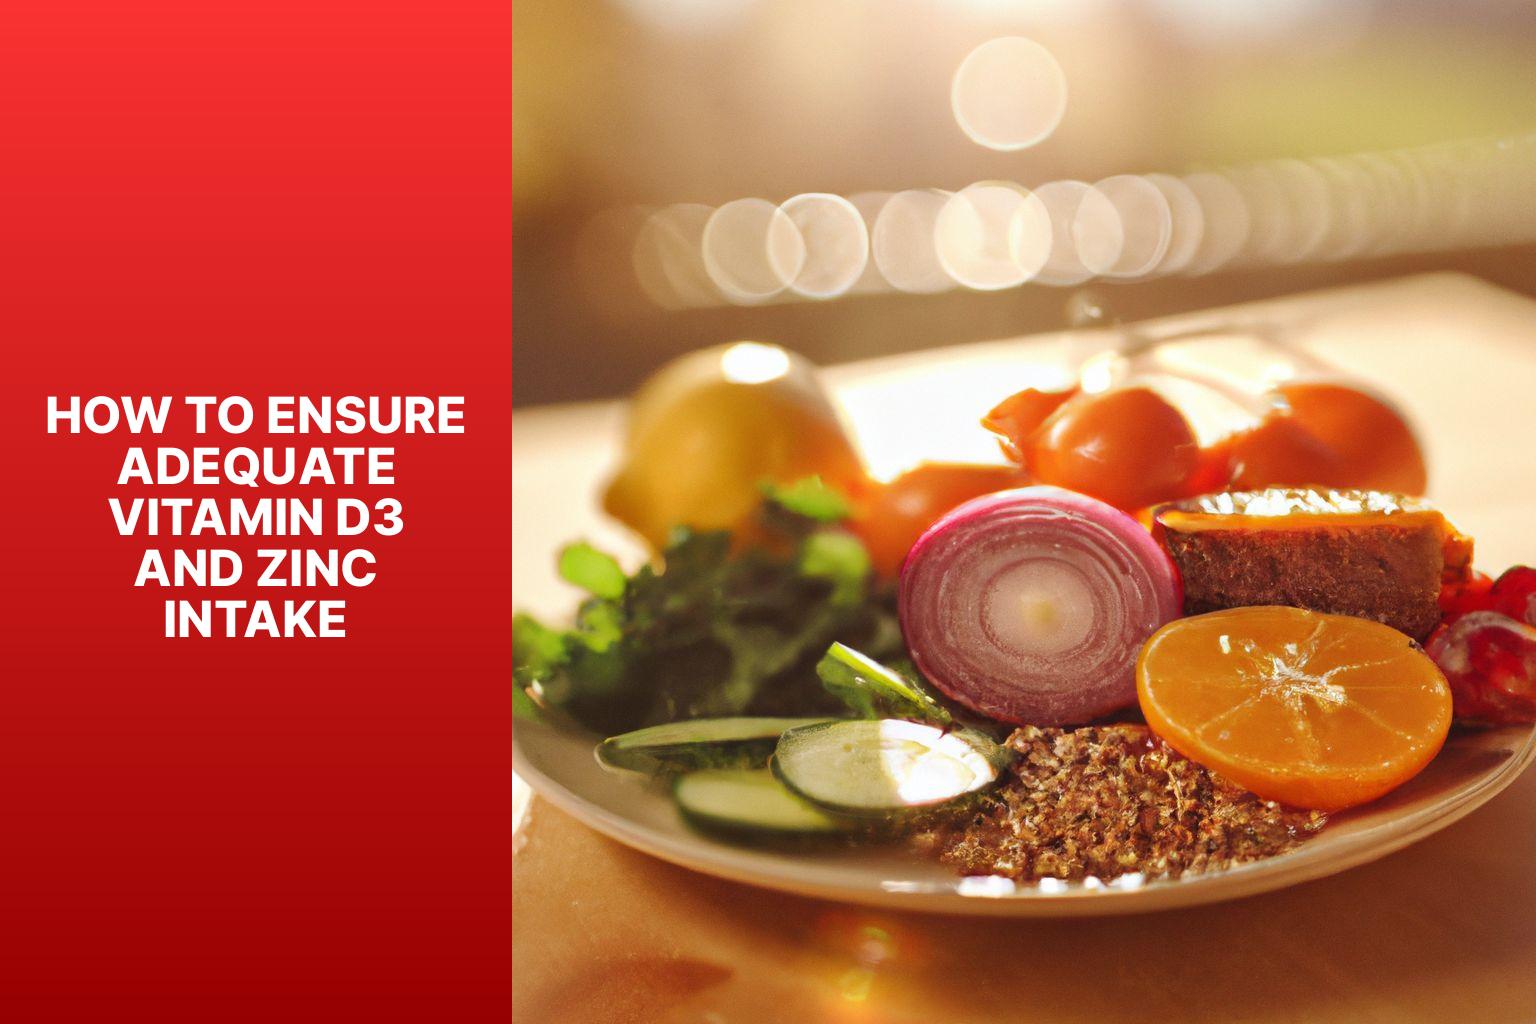 How to Ensure Adequate Vitamin D3 and Zinc Intake - The Link Between Vitamin D3 and Zinc: Health Benefits Unveiled Delve into the connection between vitamin D3 and zinc and their collective health benefits. 